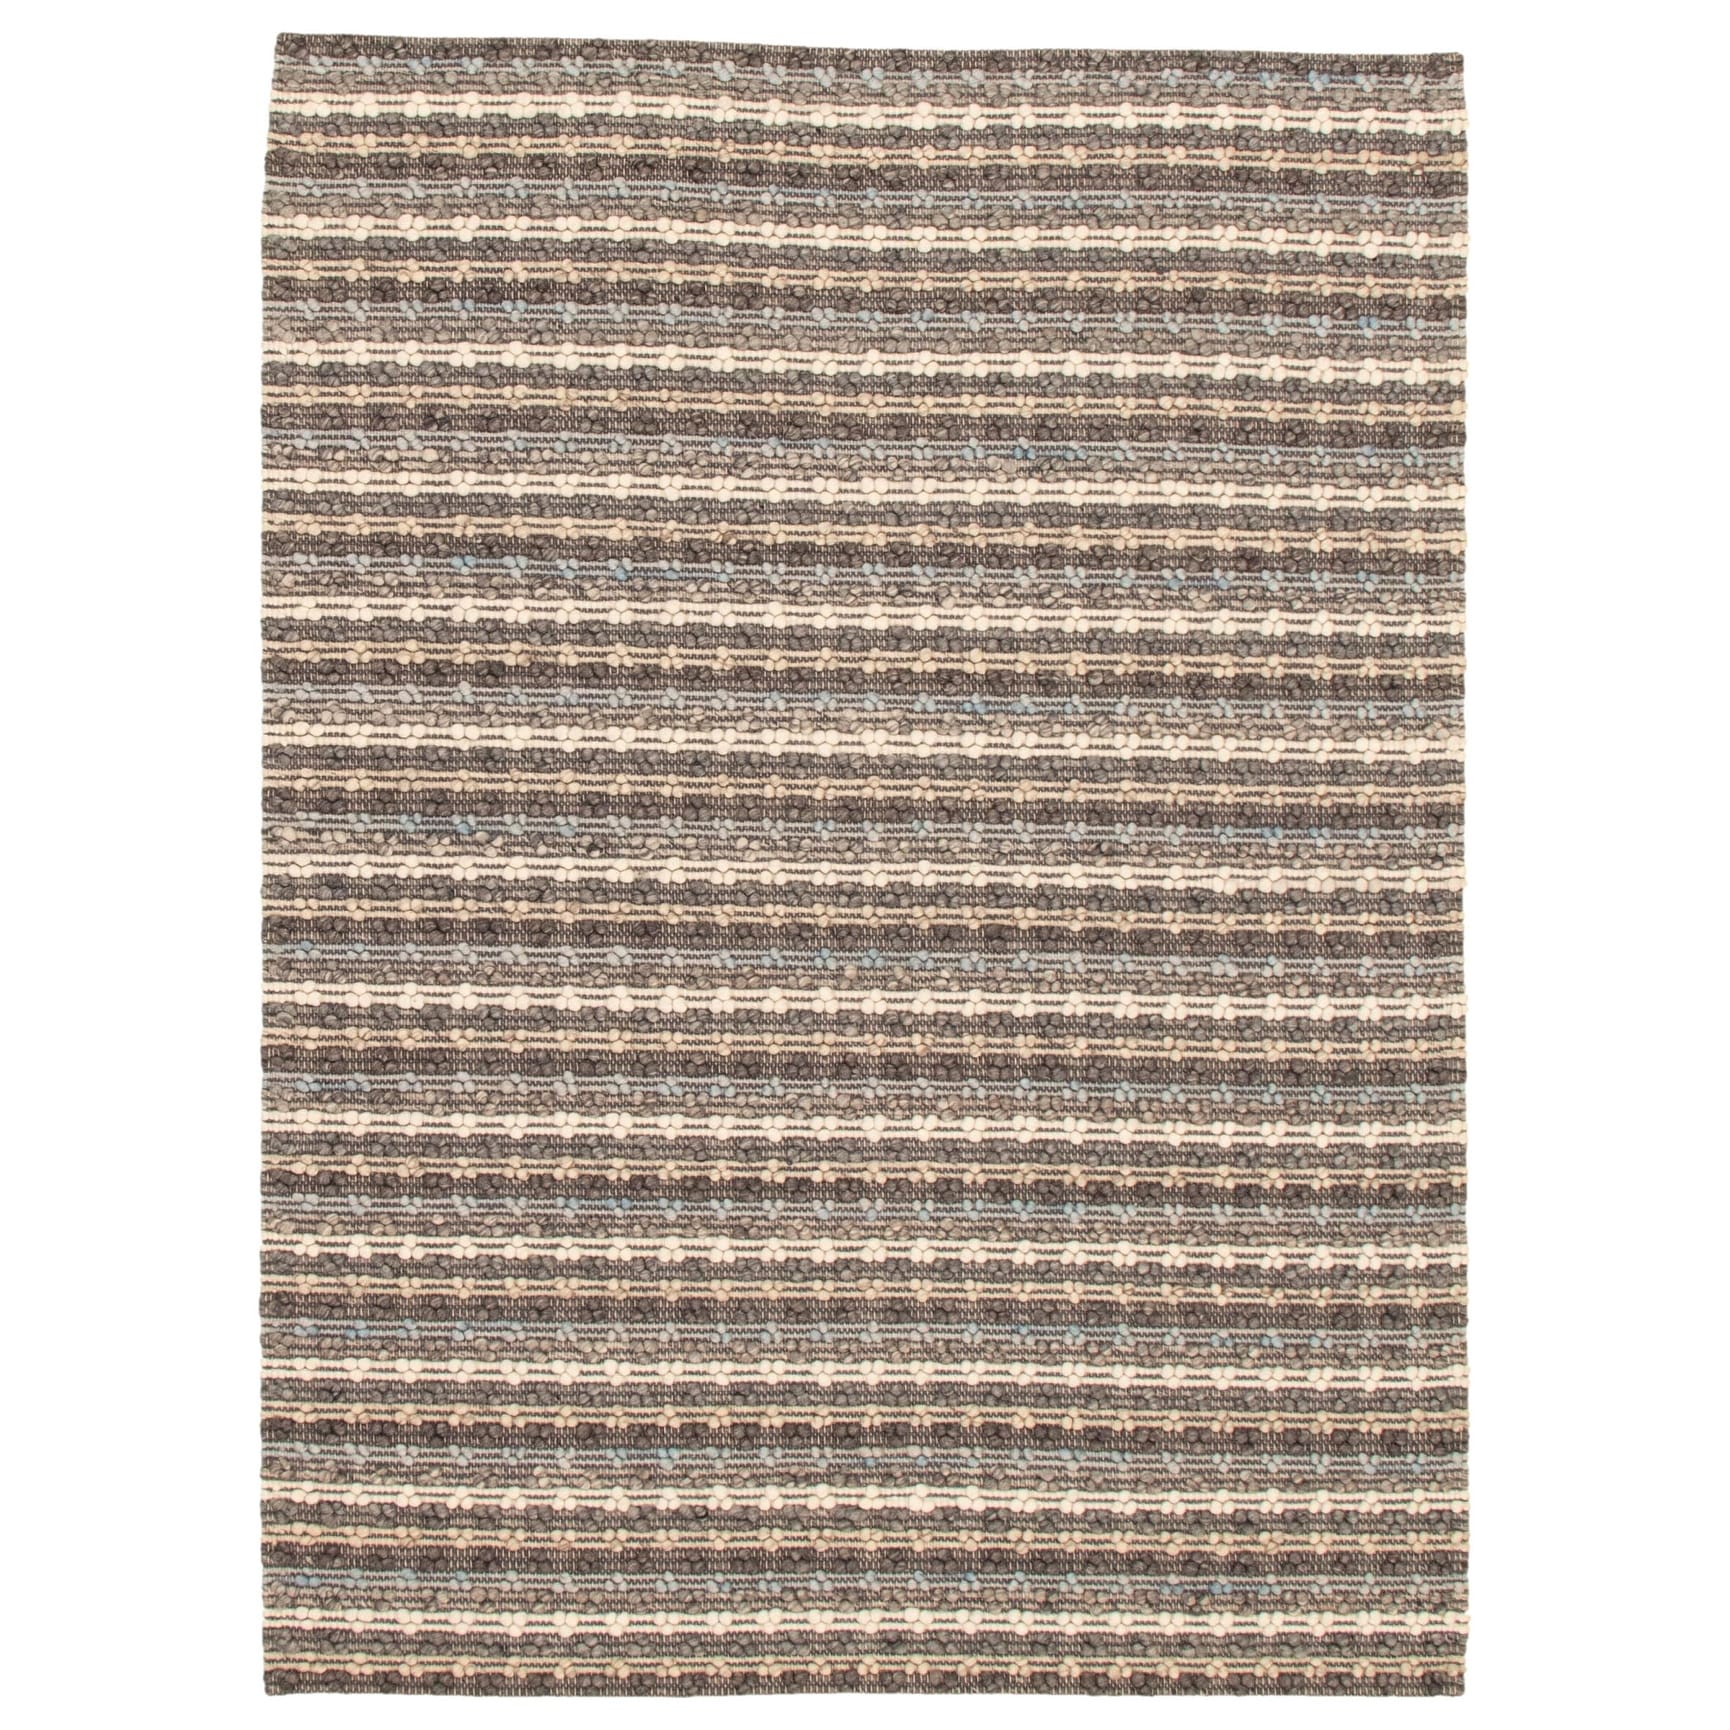 Area Rug for Living Room Sienna Braided Grey Rug 5'4 x 7'7 Bedroom eCarpet Gallery Hand-Knotted 349088 